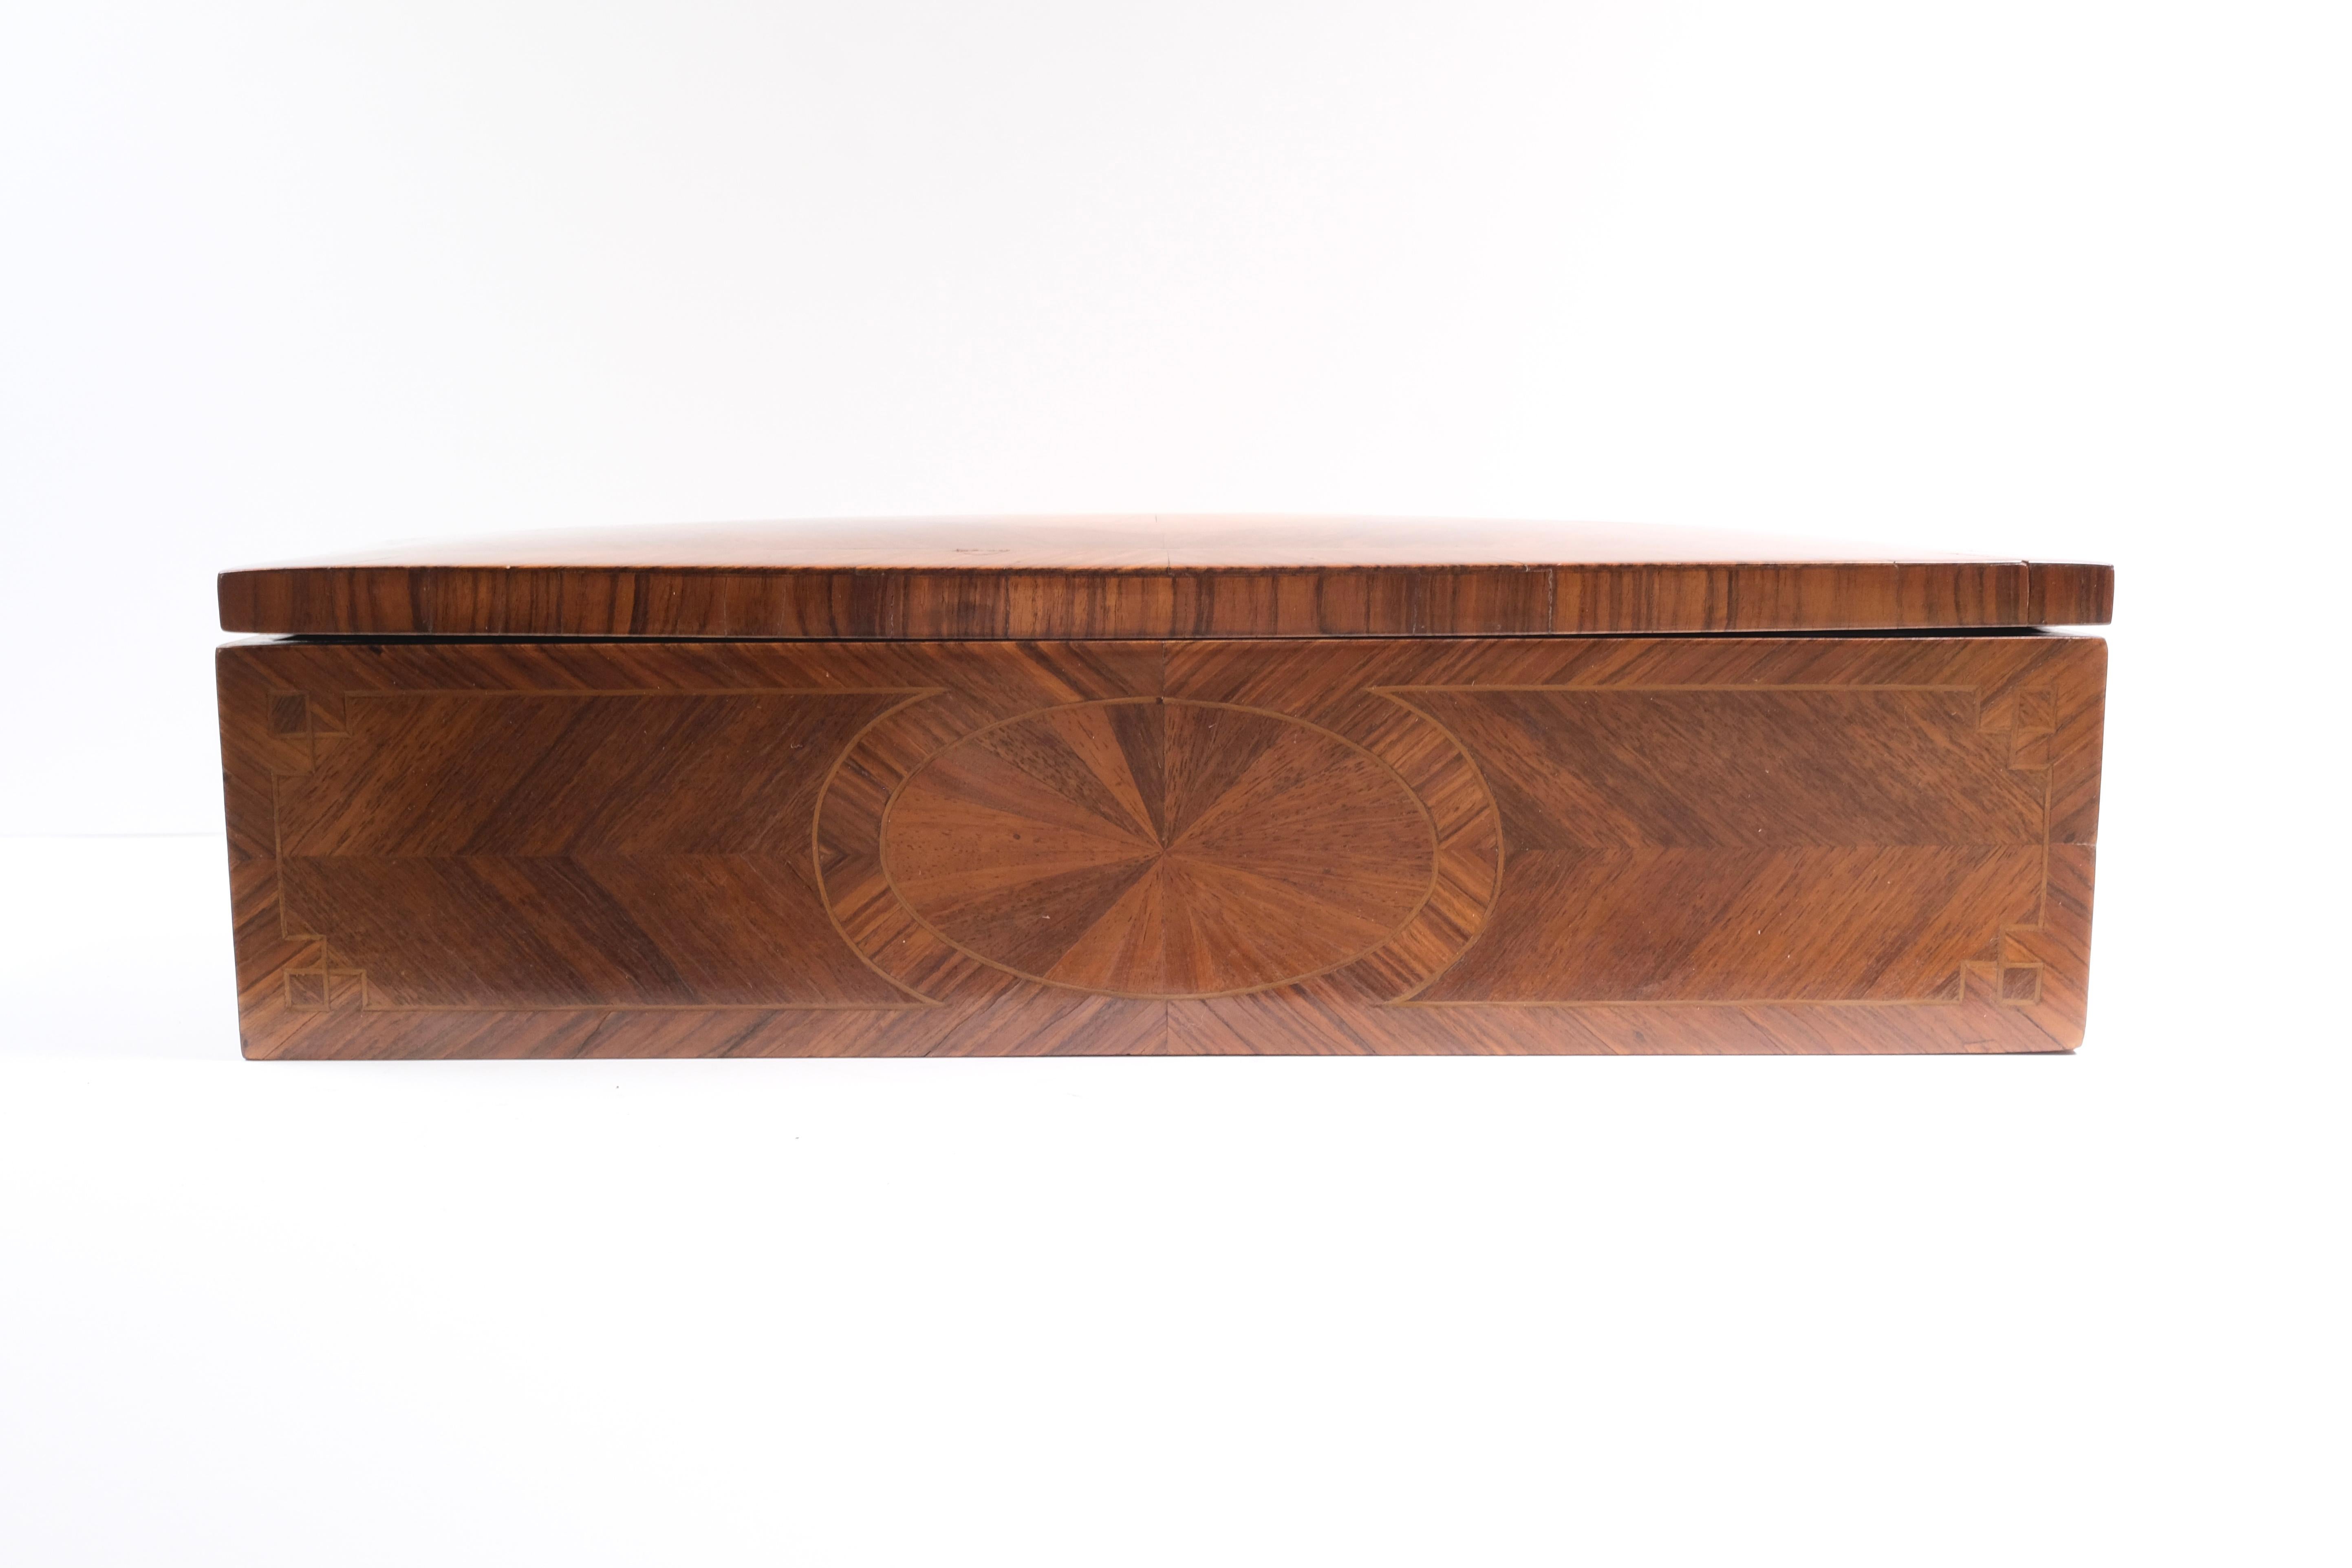 Inlaid with several different exotic woods including walnut. Medallion inlay.